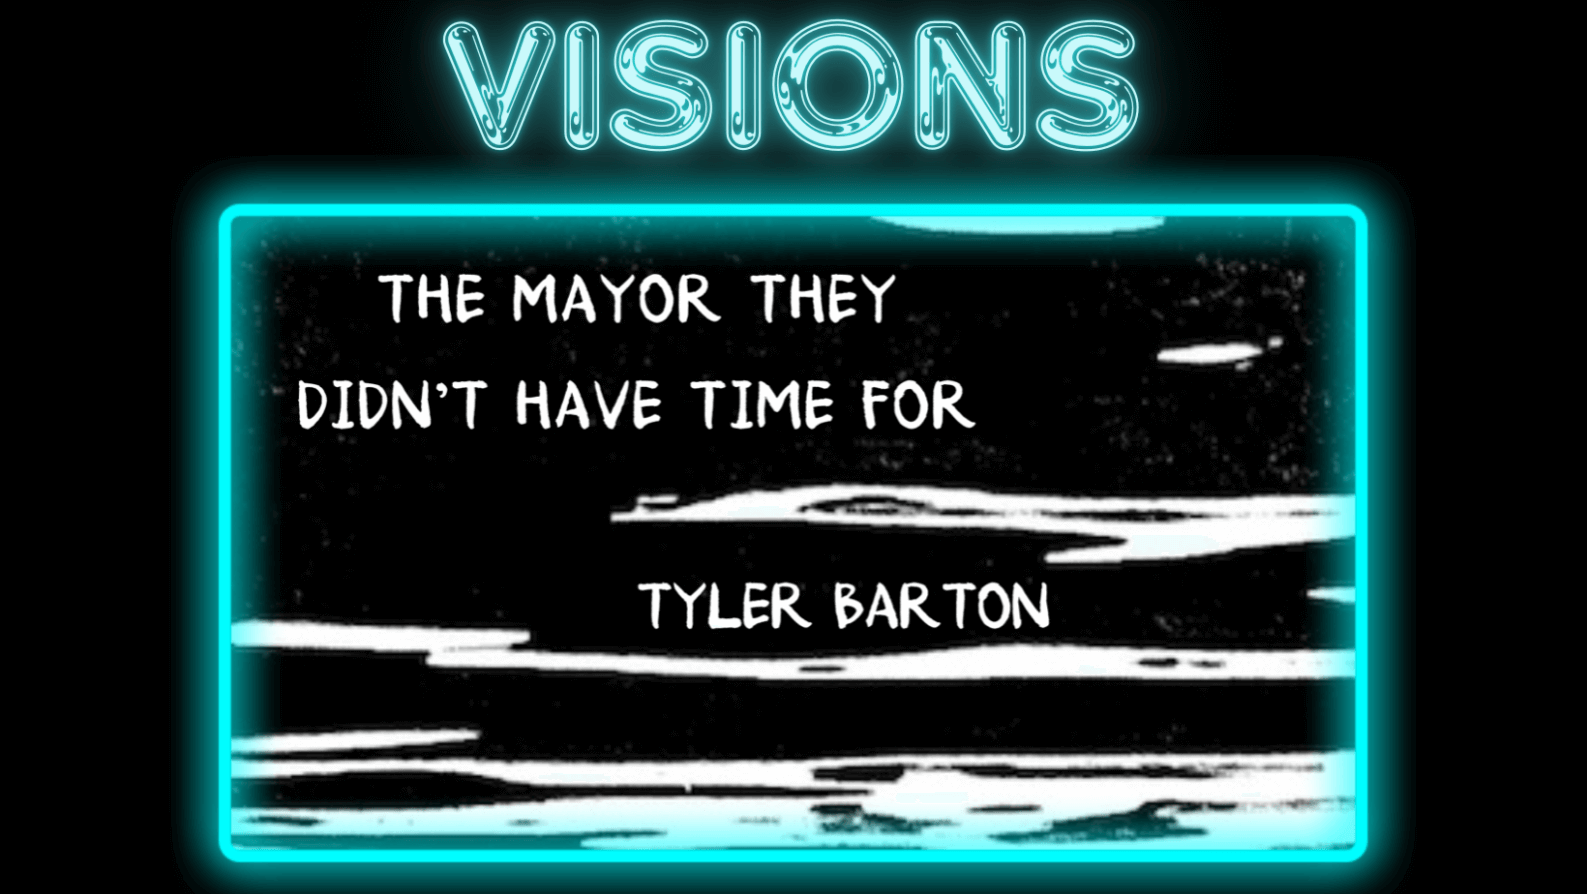 VISIONS: THE MAYOR THEY DIDN’T HAVE TIME FOR by Tyler Barton